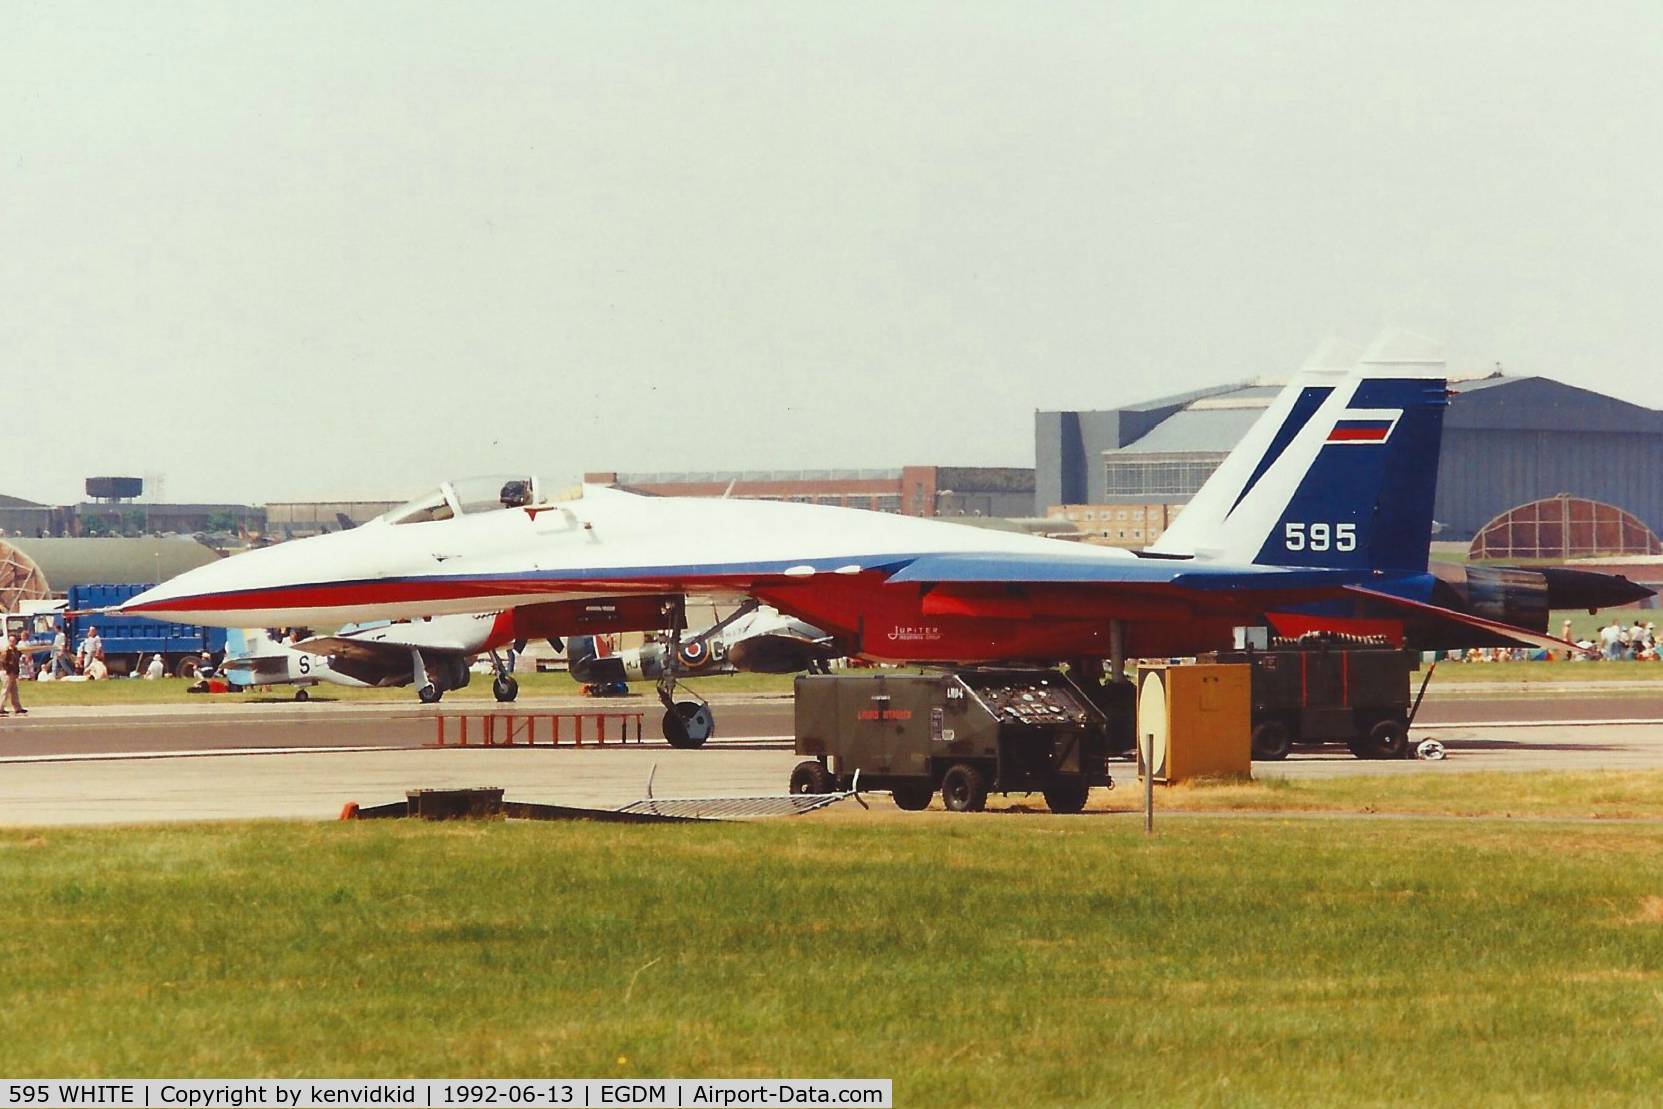 595 WHITE, Sukhoi Su-27P C/N 36911037511, At Boscombe Down, scanned from print.